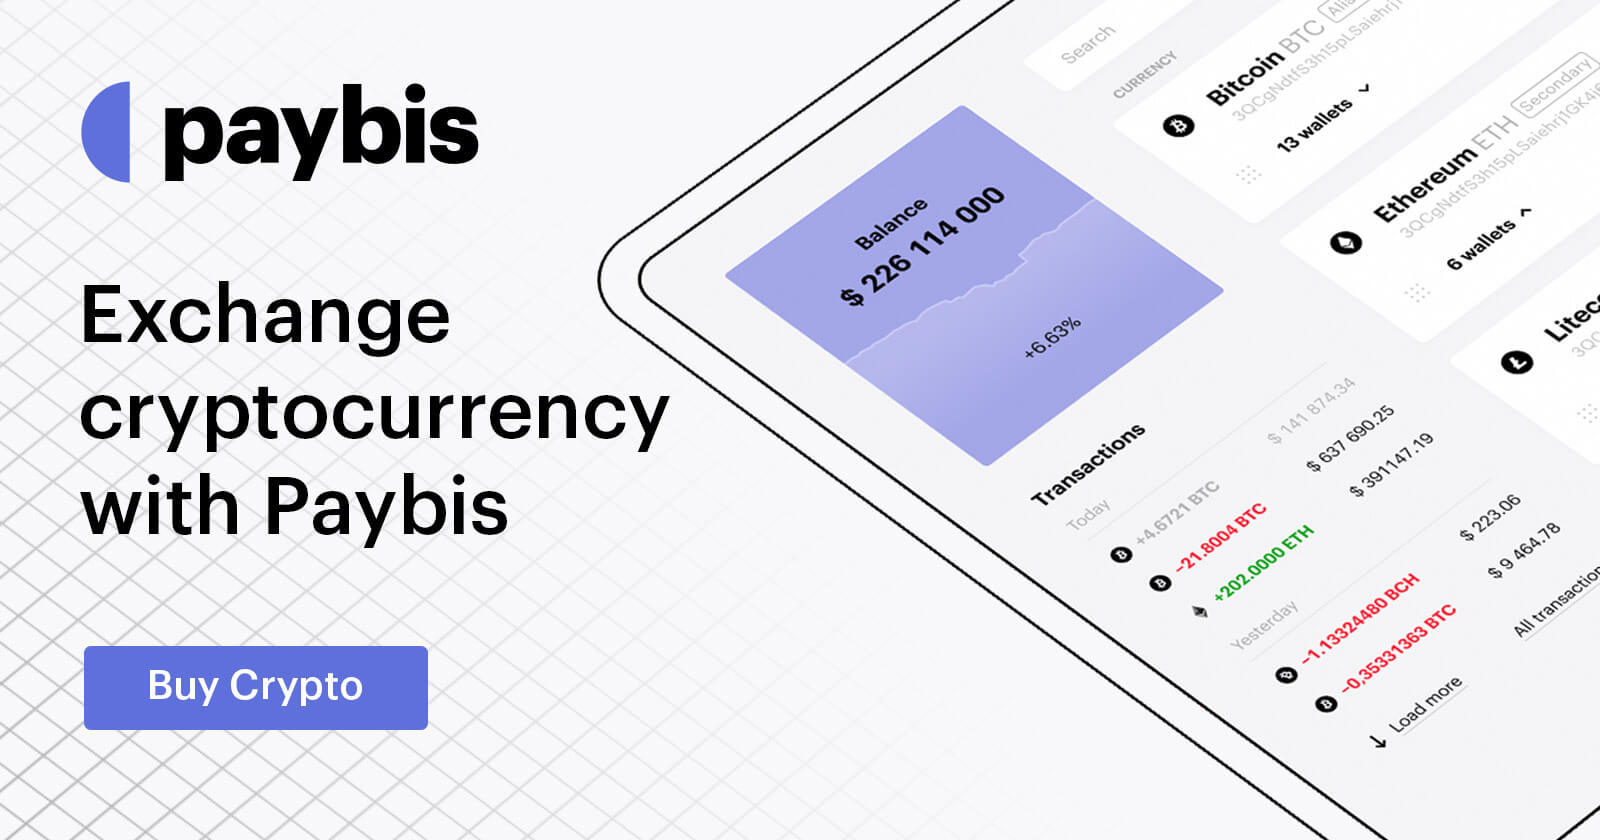  crypto exchange paybis credit support transaction occurred 